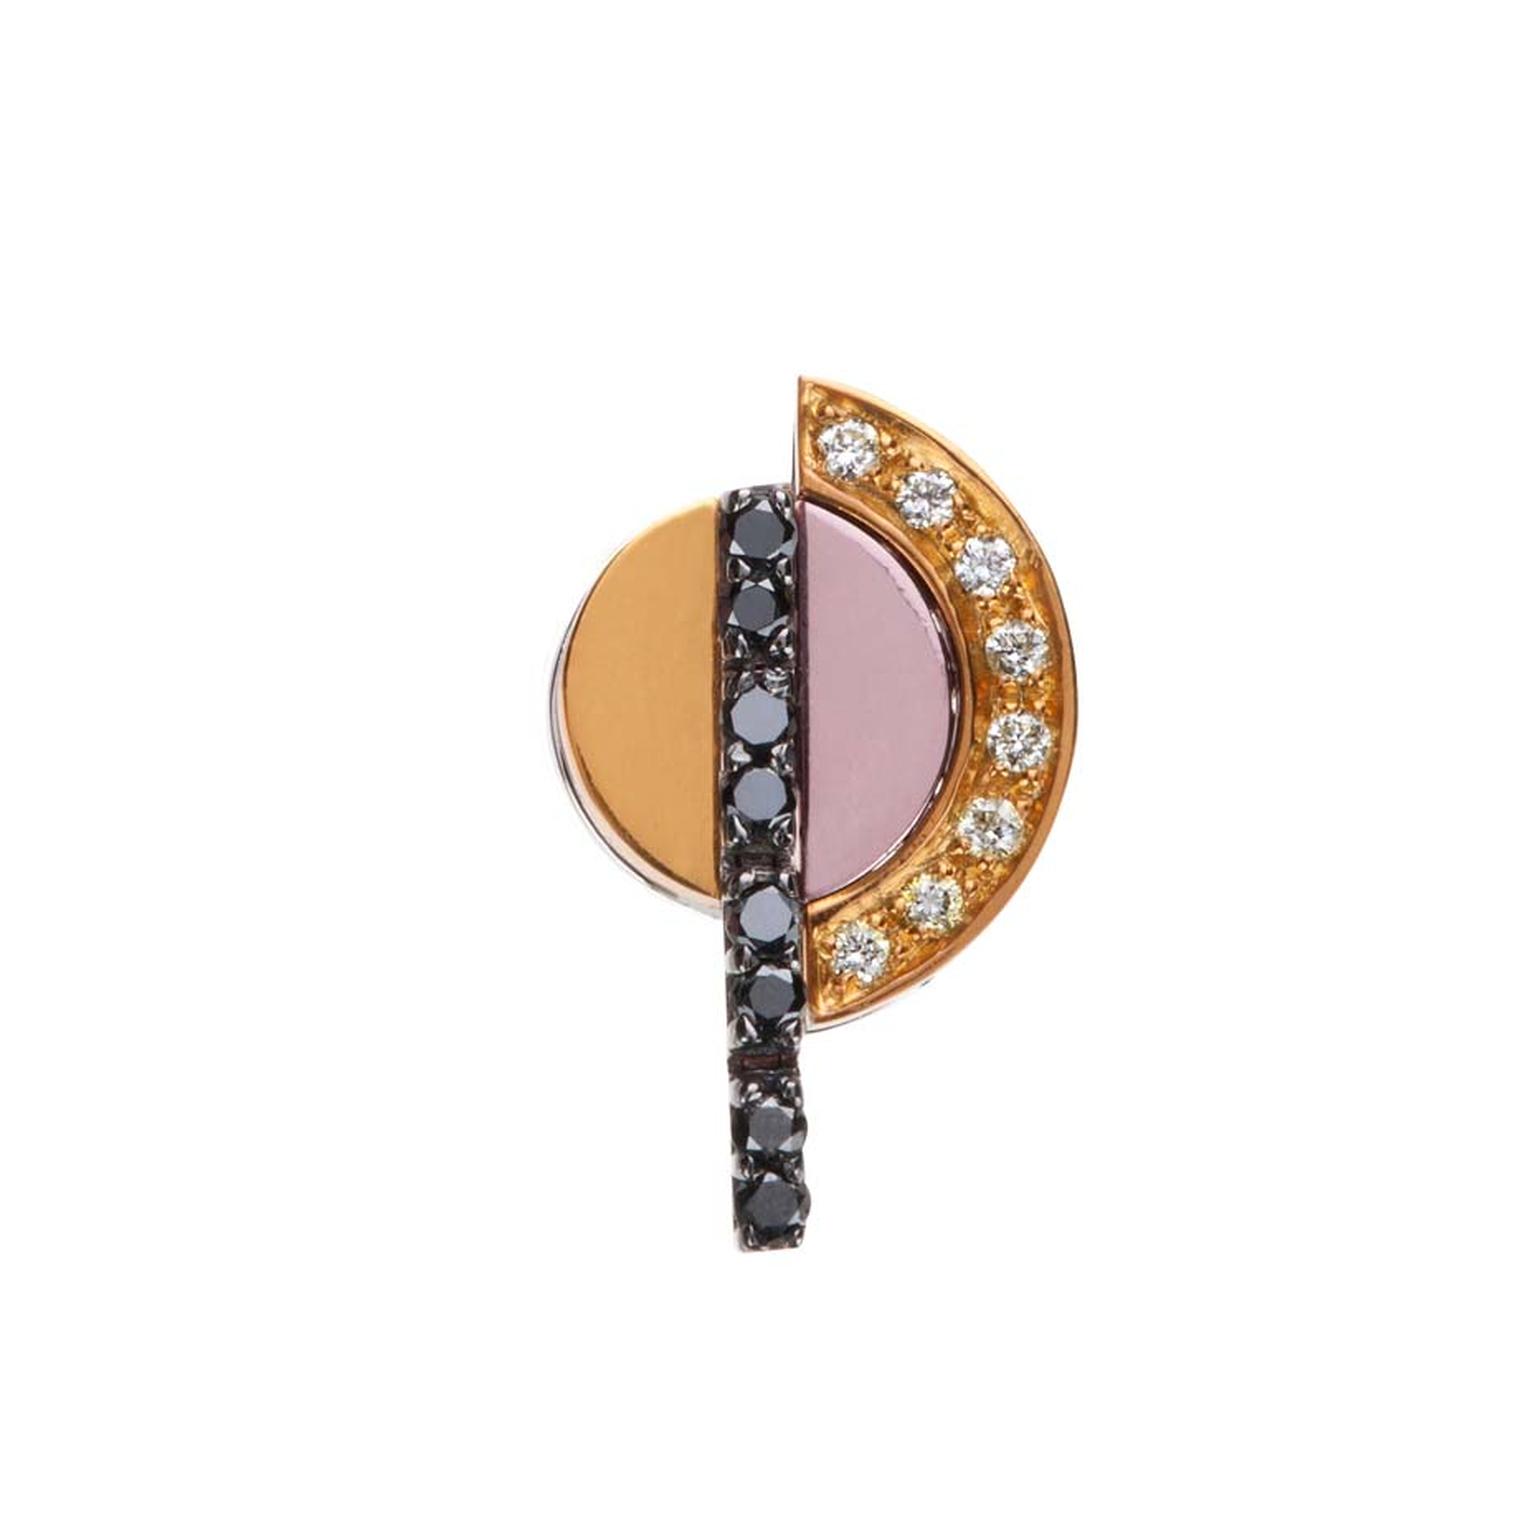 Nikos Koulis earring, from the Acrobat collection, in black rhodium, with white and black diamonds and white gold hand-painted in yellow and pink.